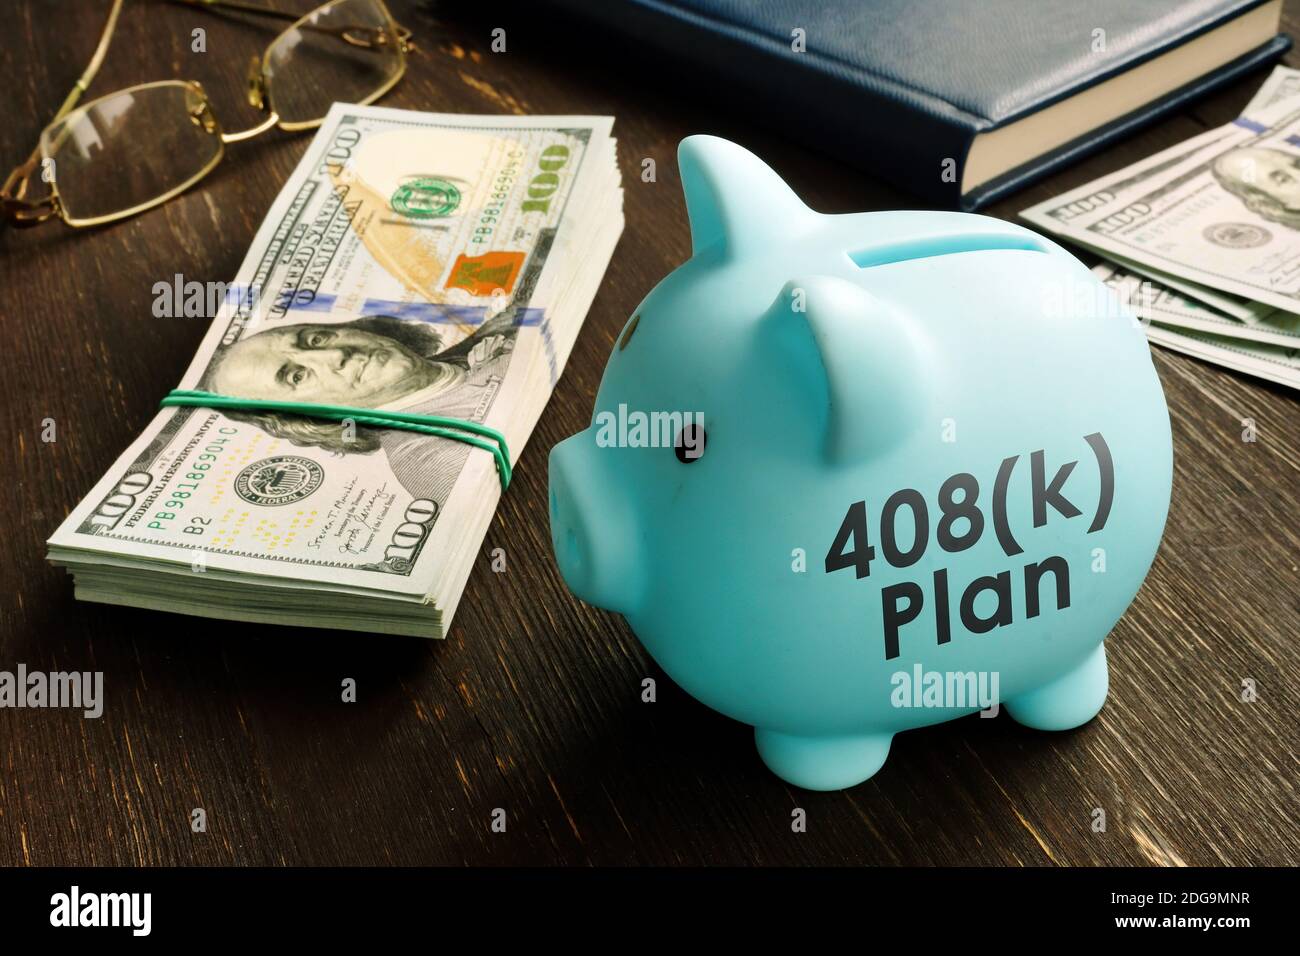 Piggy bank with 408k plan words and cash. Stock Photo